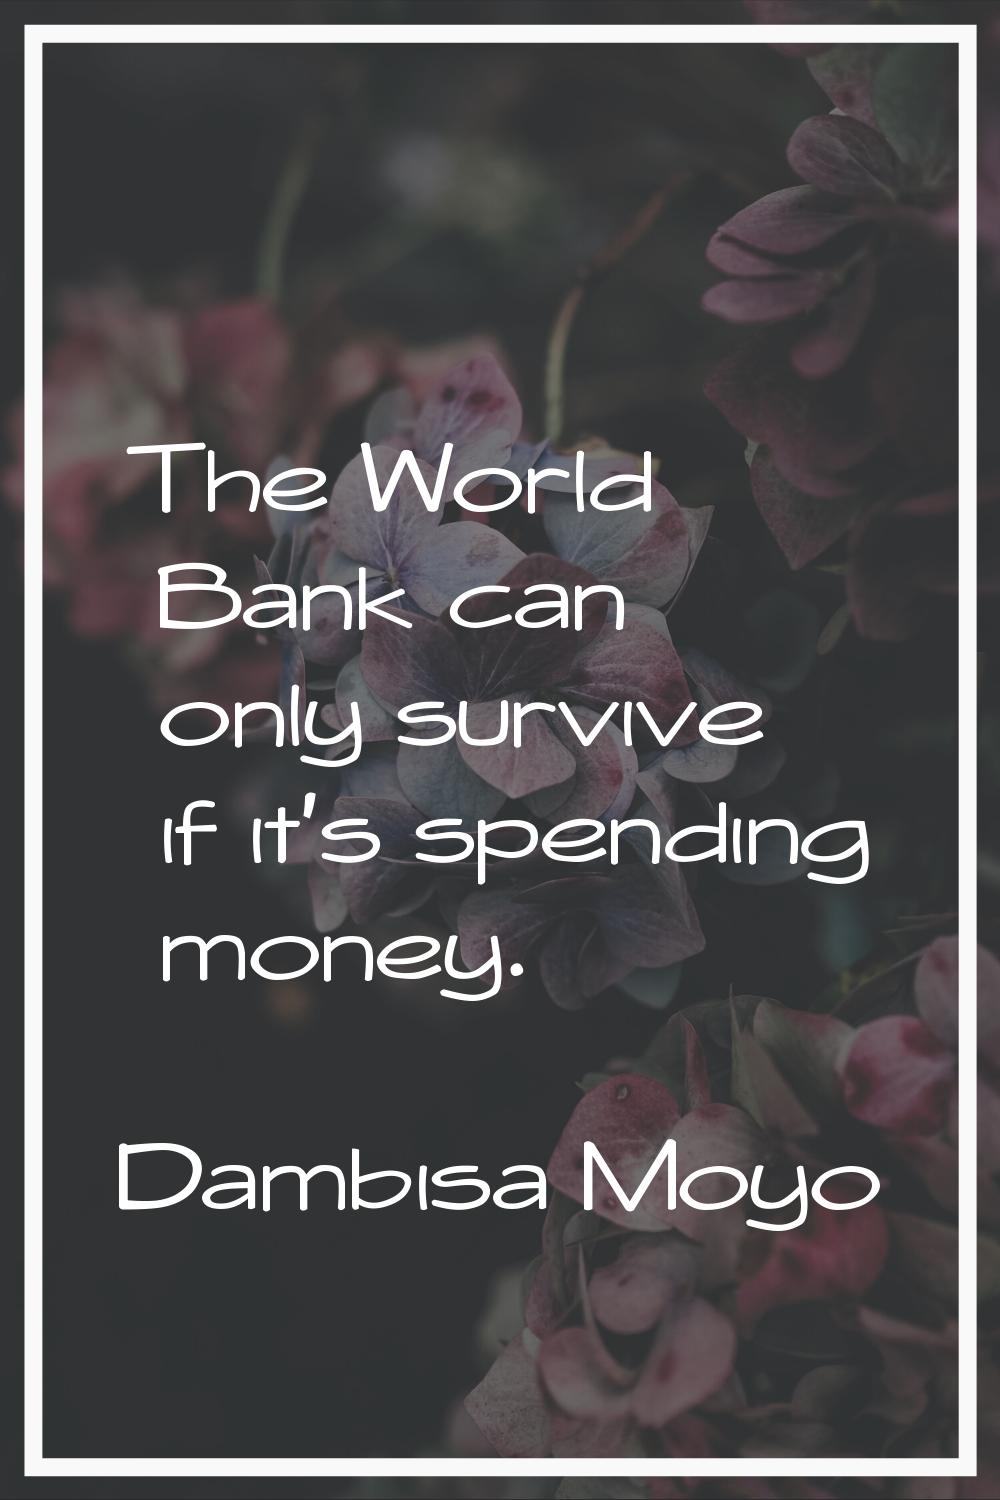 The World Bank can only survive if it's spending money.